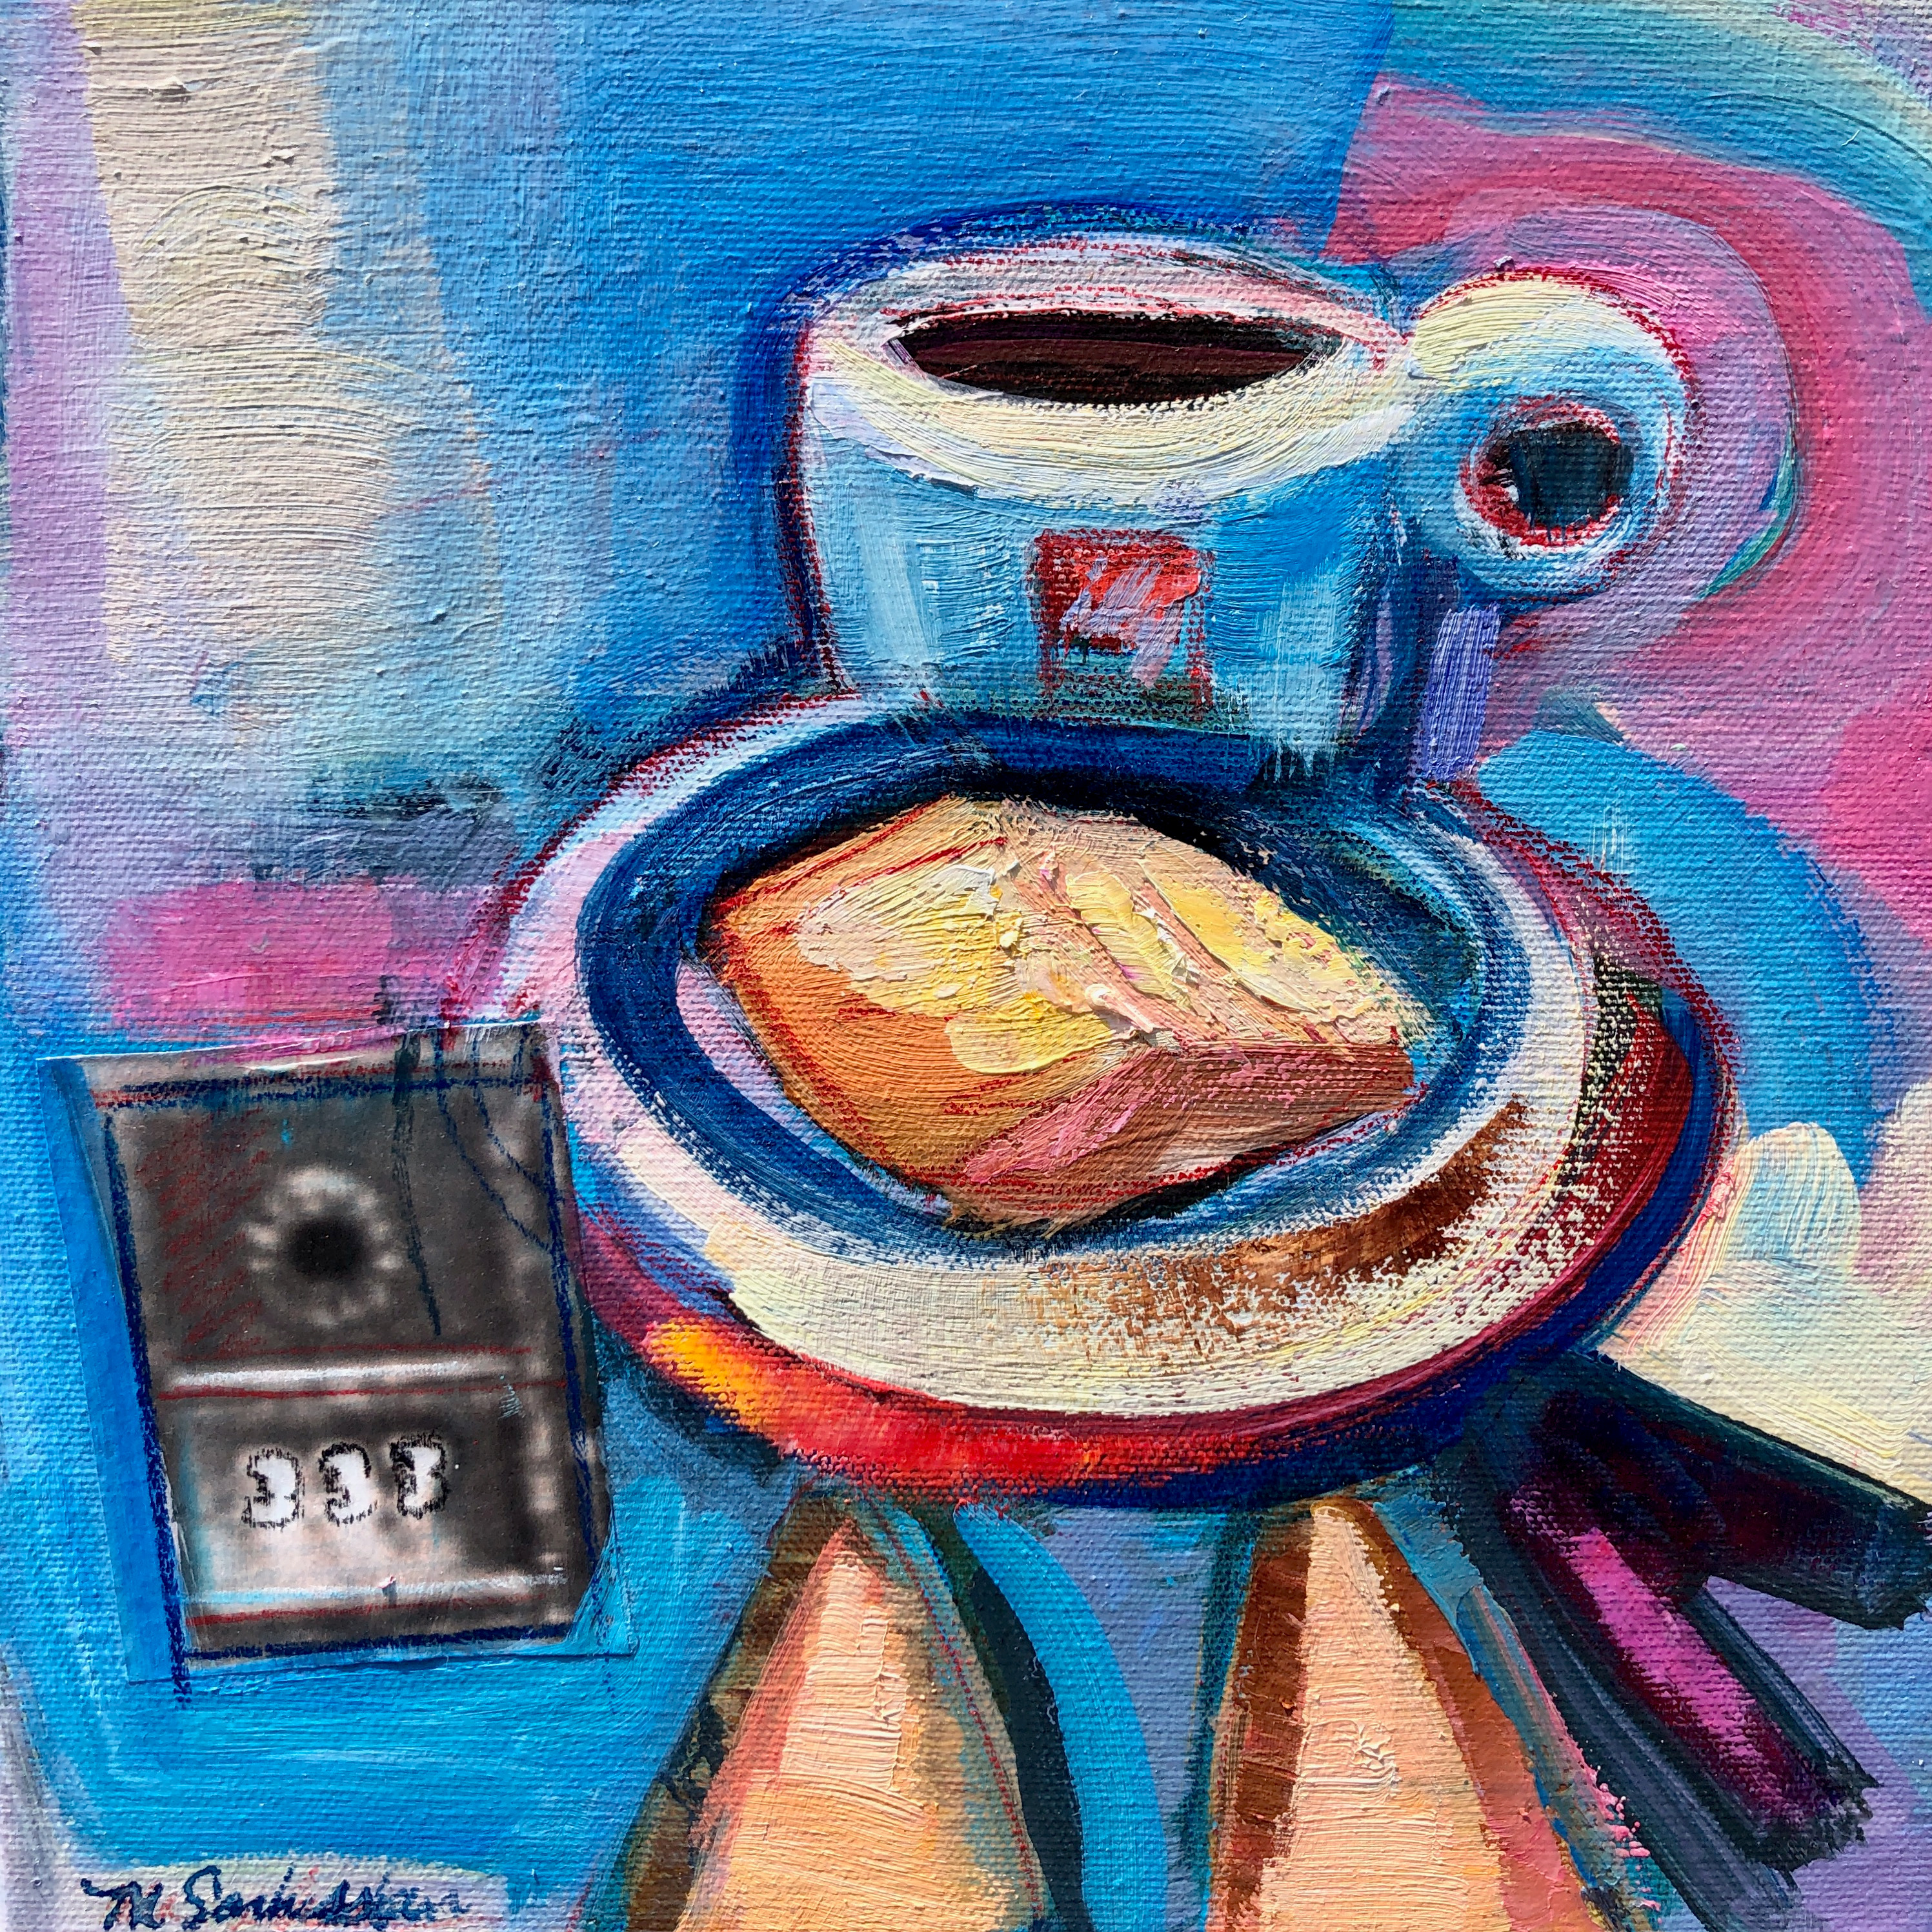 Times of refreshment 333 oil on canvas 10x10 1 catr3a